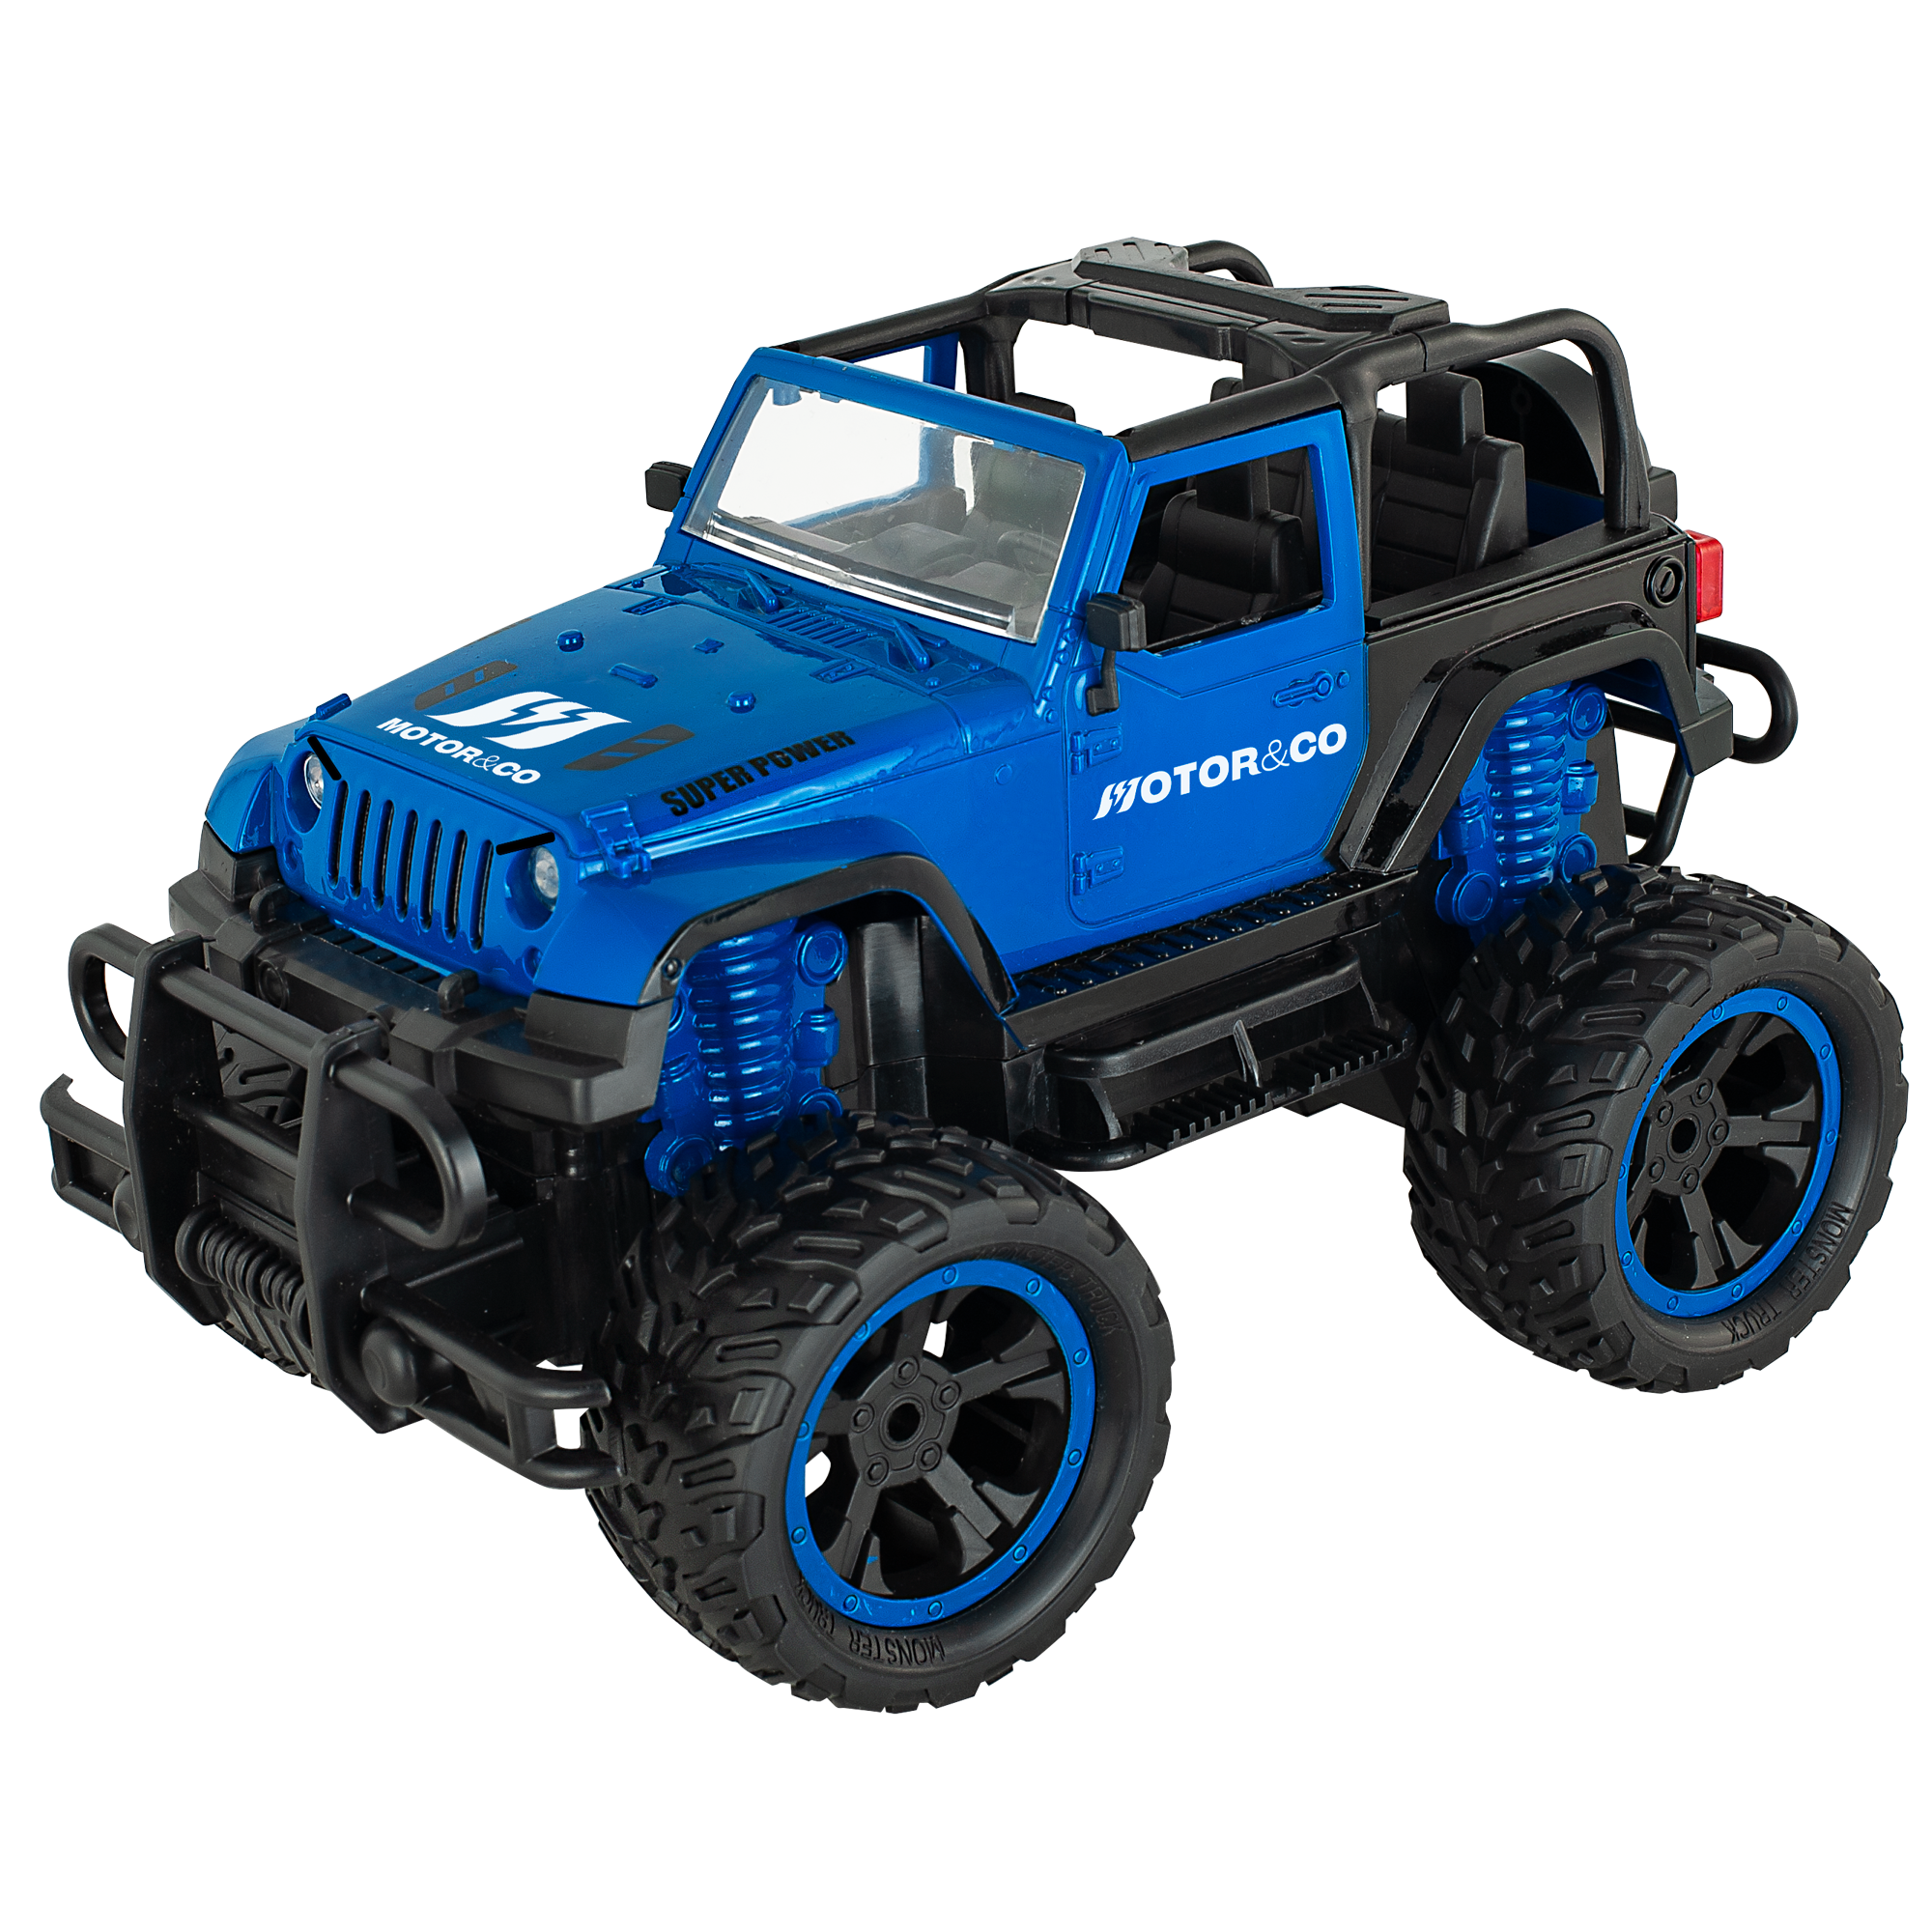 Auto r/c off-road power - MOTOR & CO.